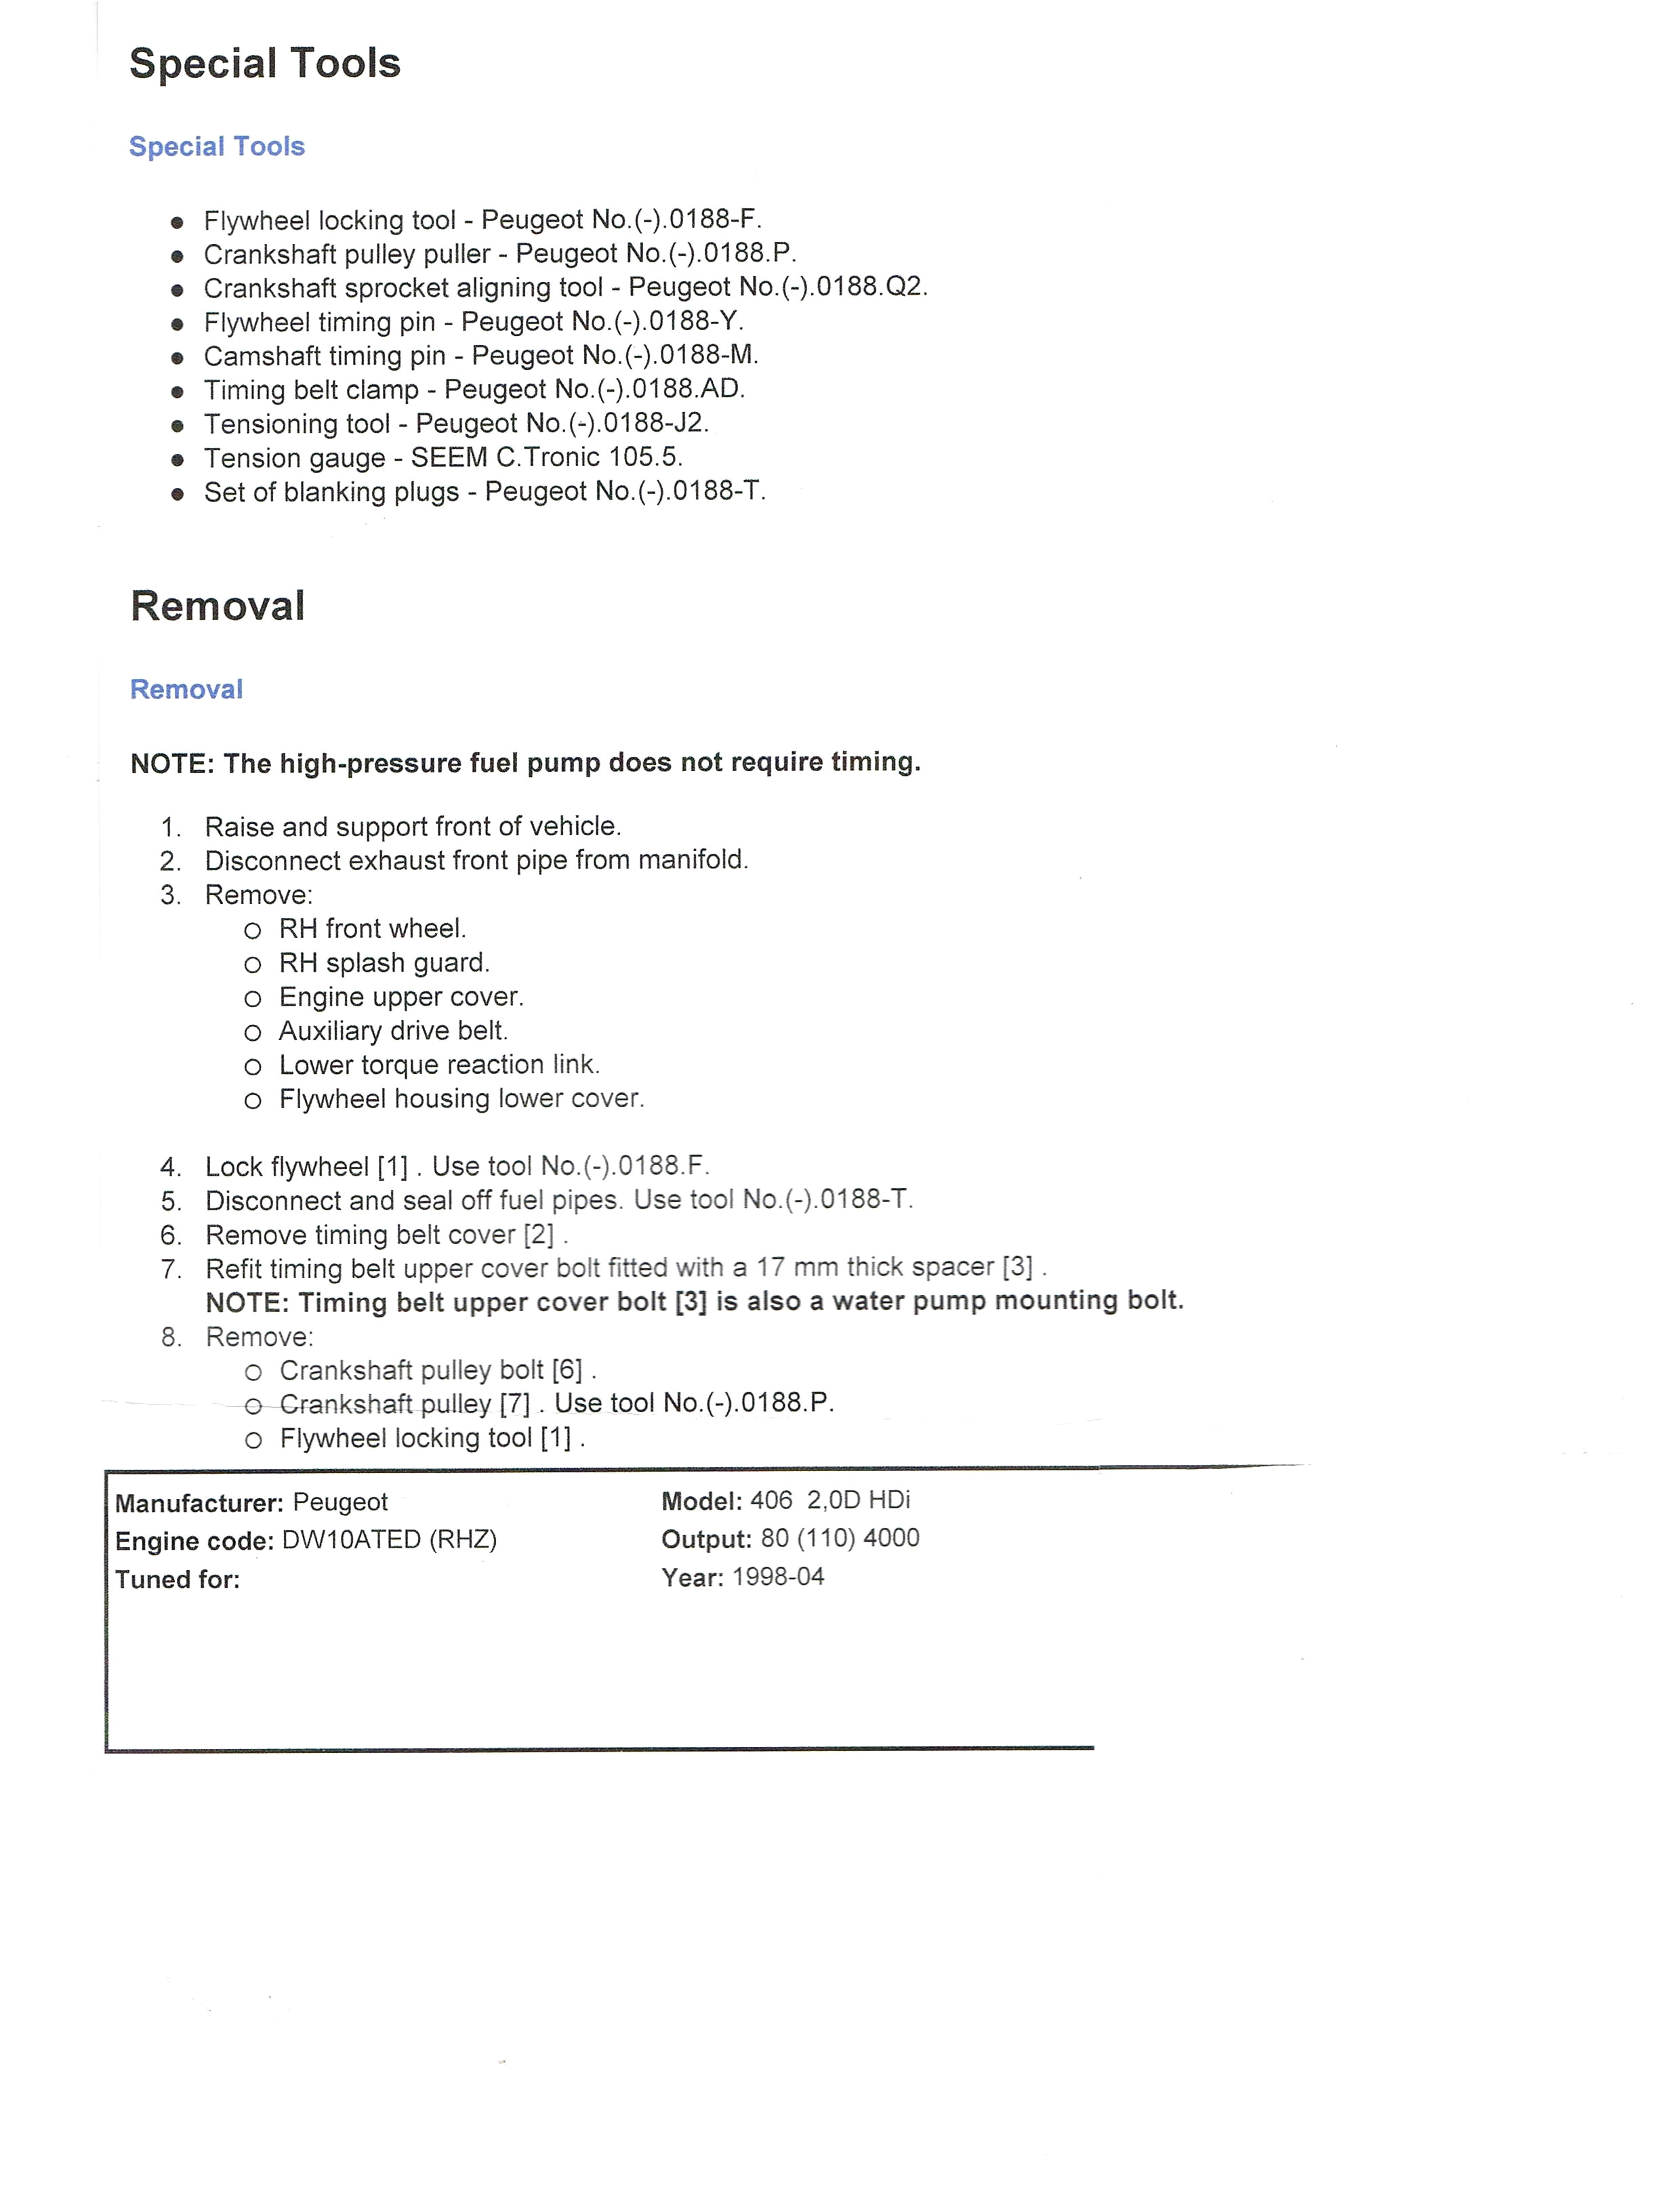 How To Do A Resume Resume About Me how to do a resume|wikiresume.com